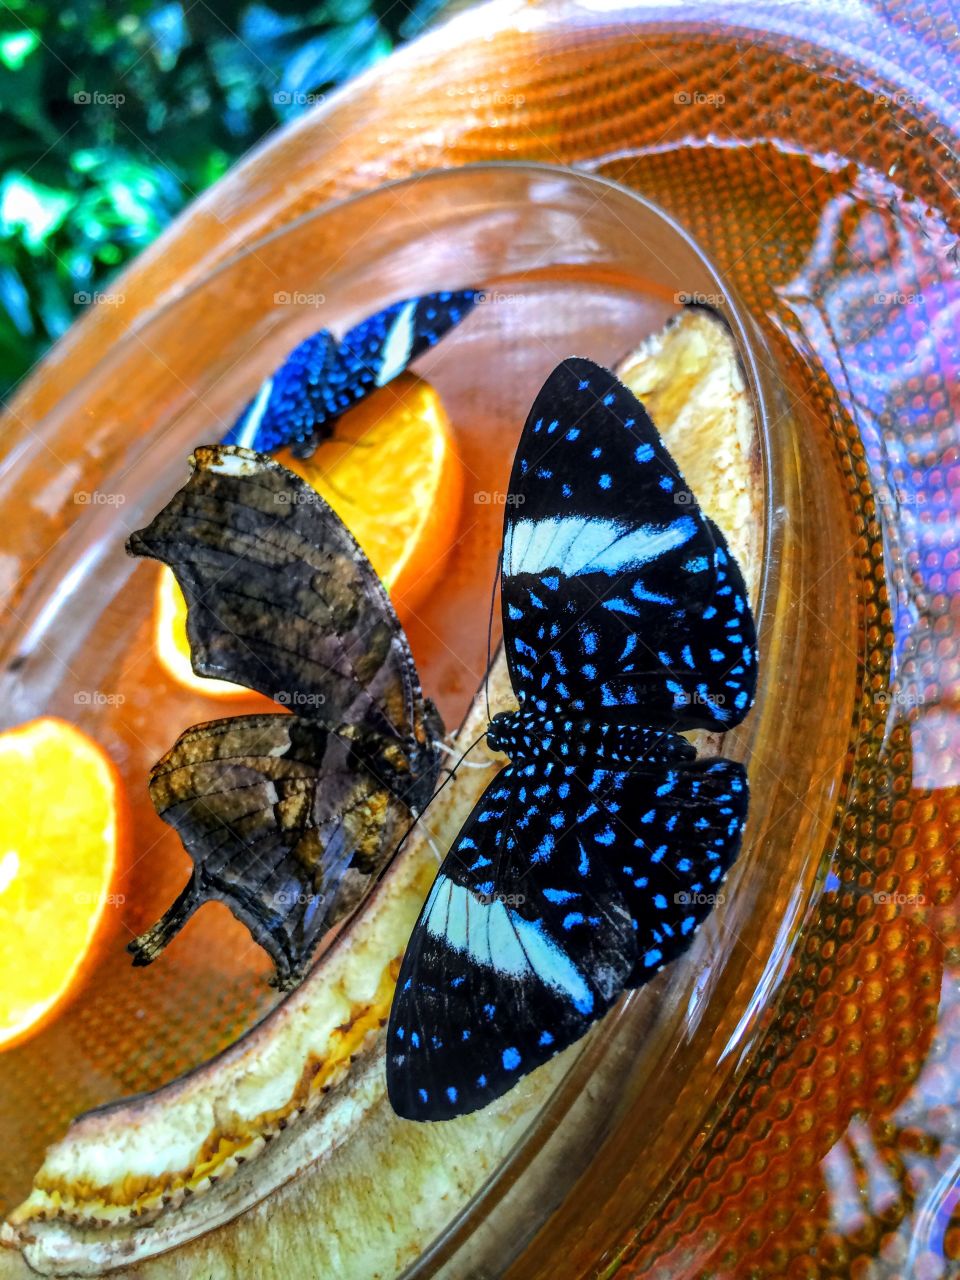 Butterfly with orange fruit